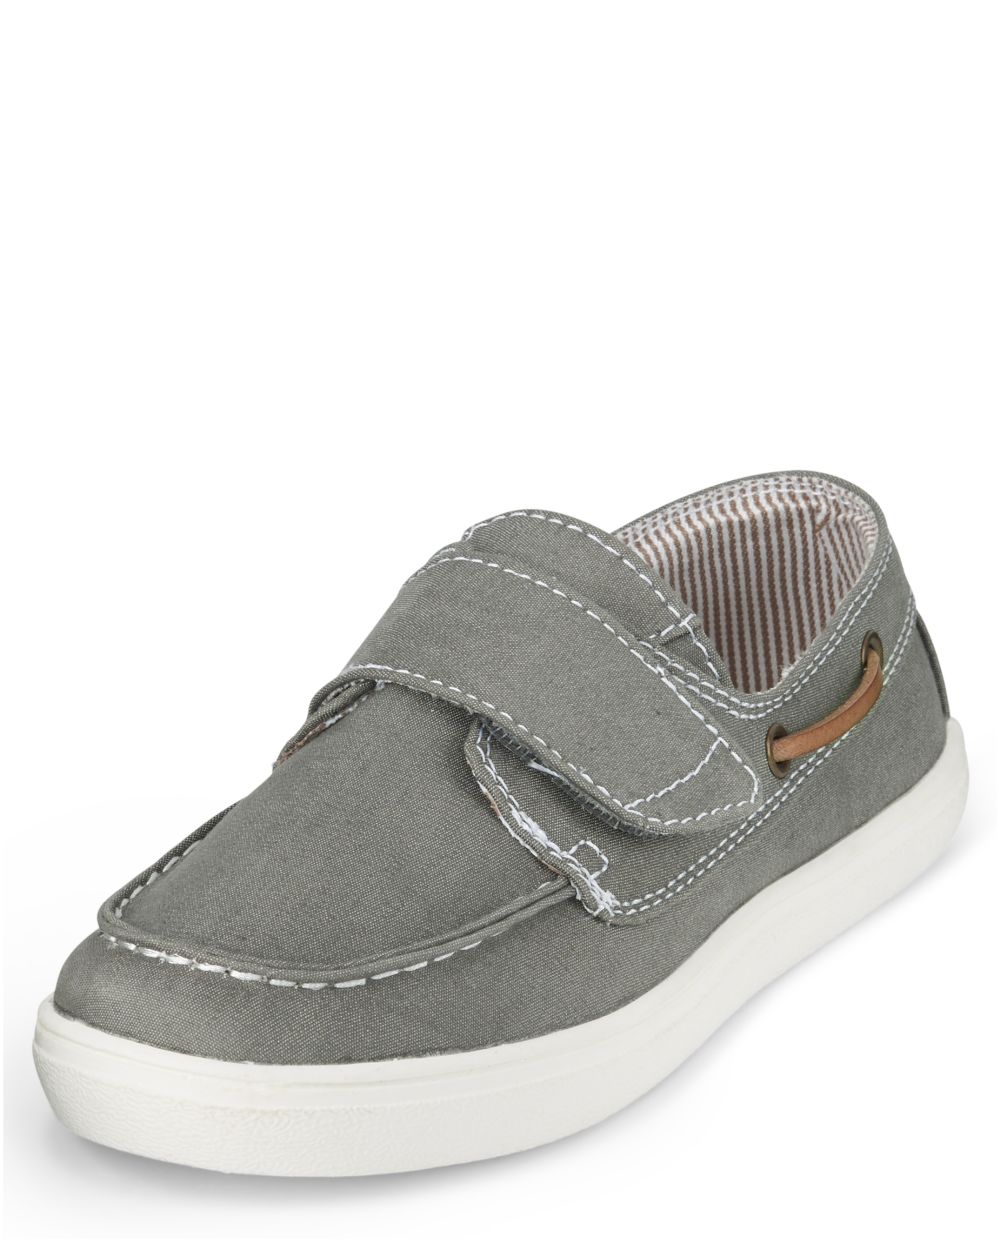 

Boys Boys Chambray Boat Shoes - Gray - The Children's Place